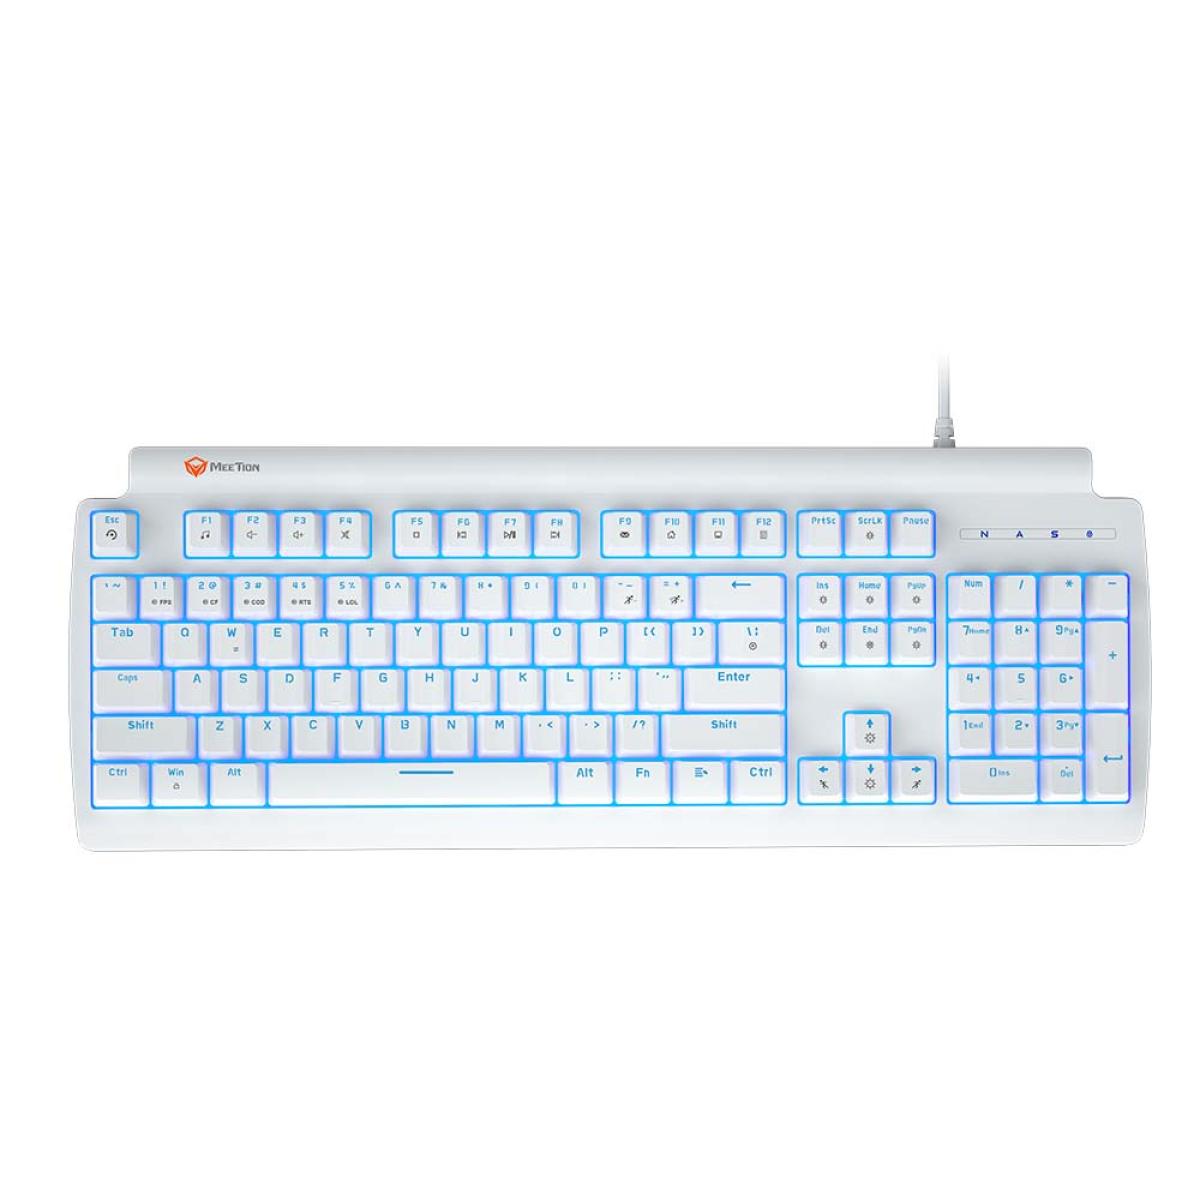 Meetion Blue Switch Olly Go Mechanical Gaming Keyboard - White